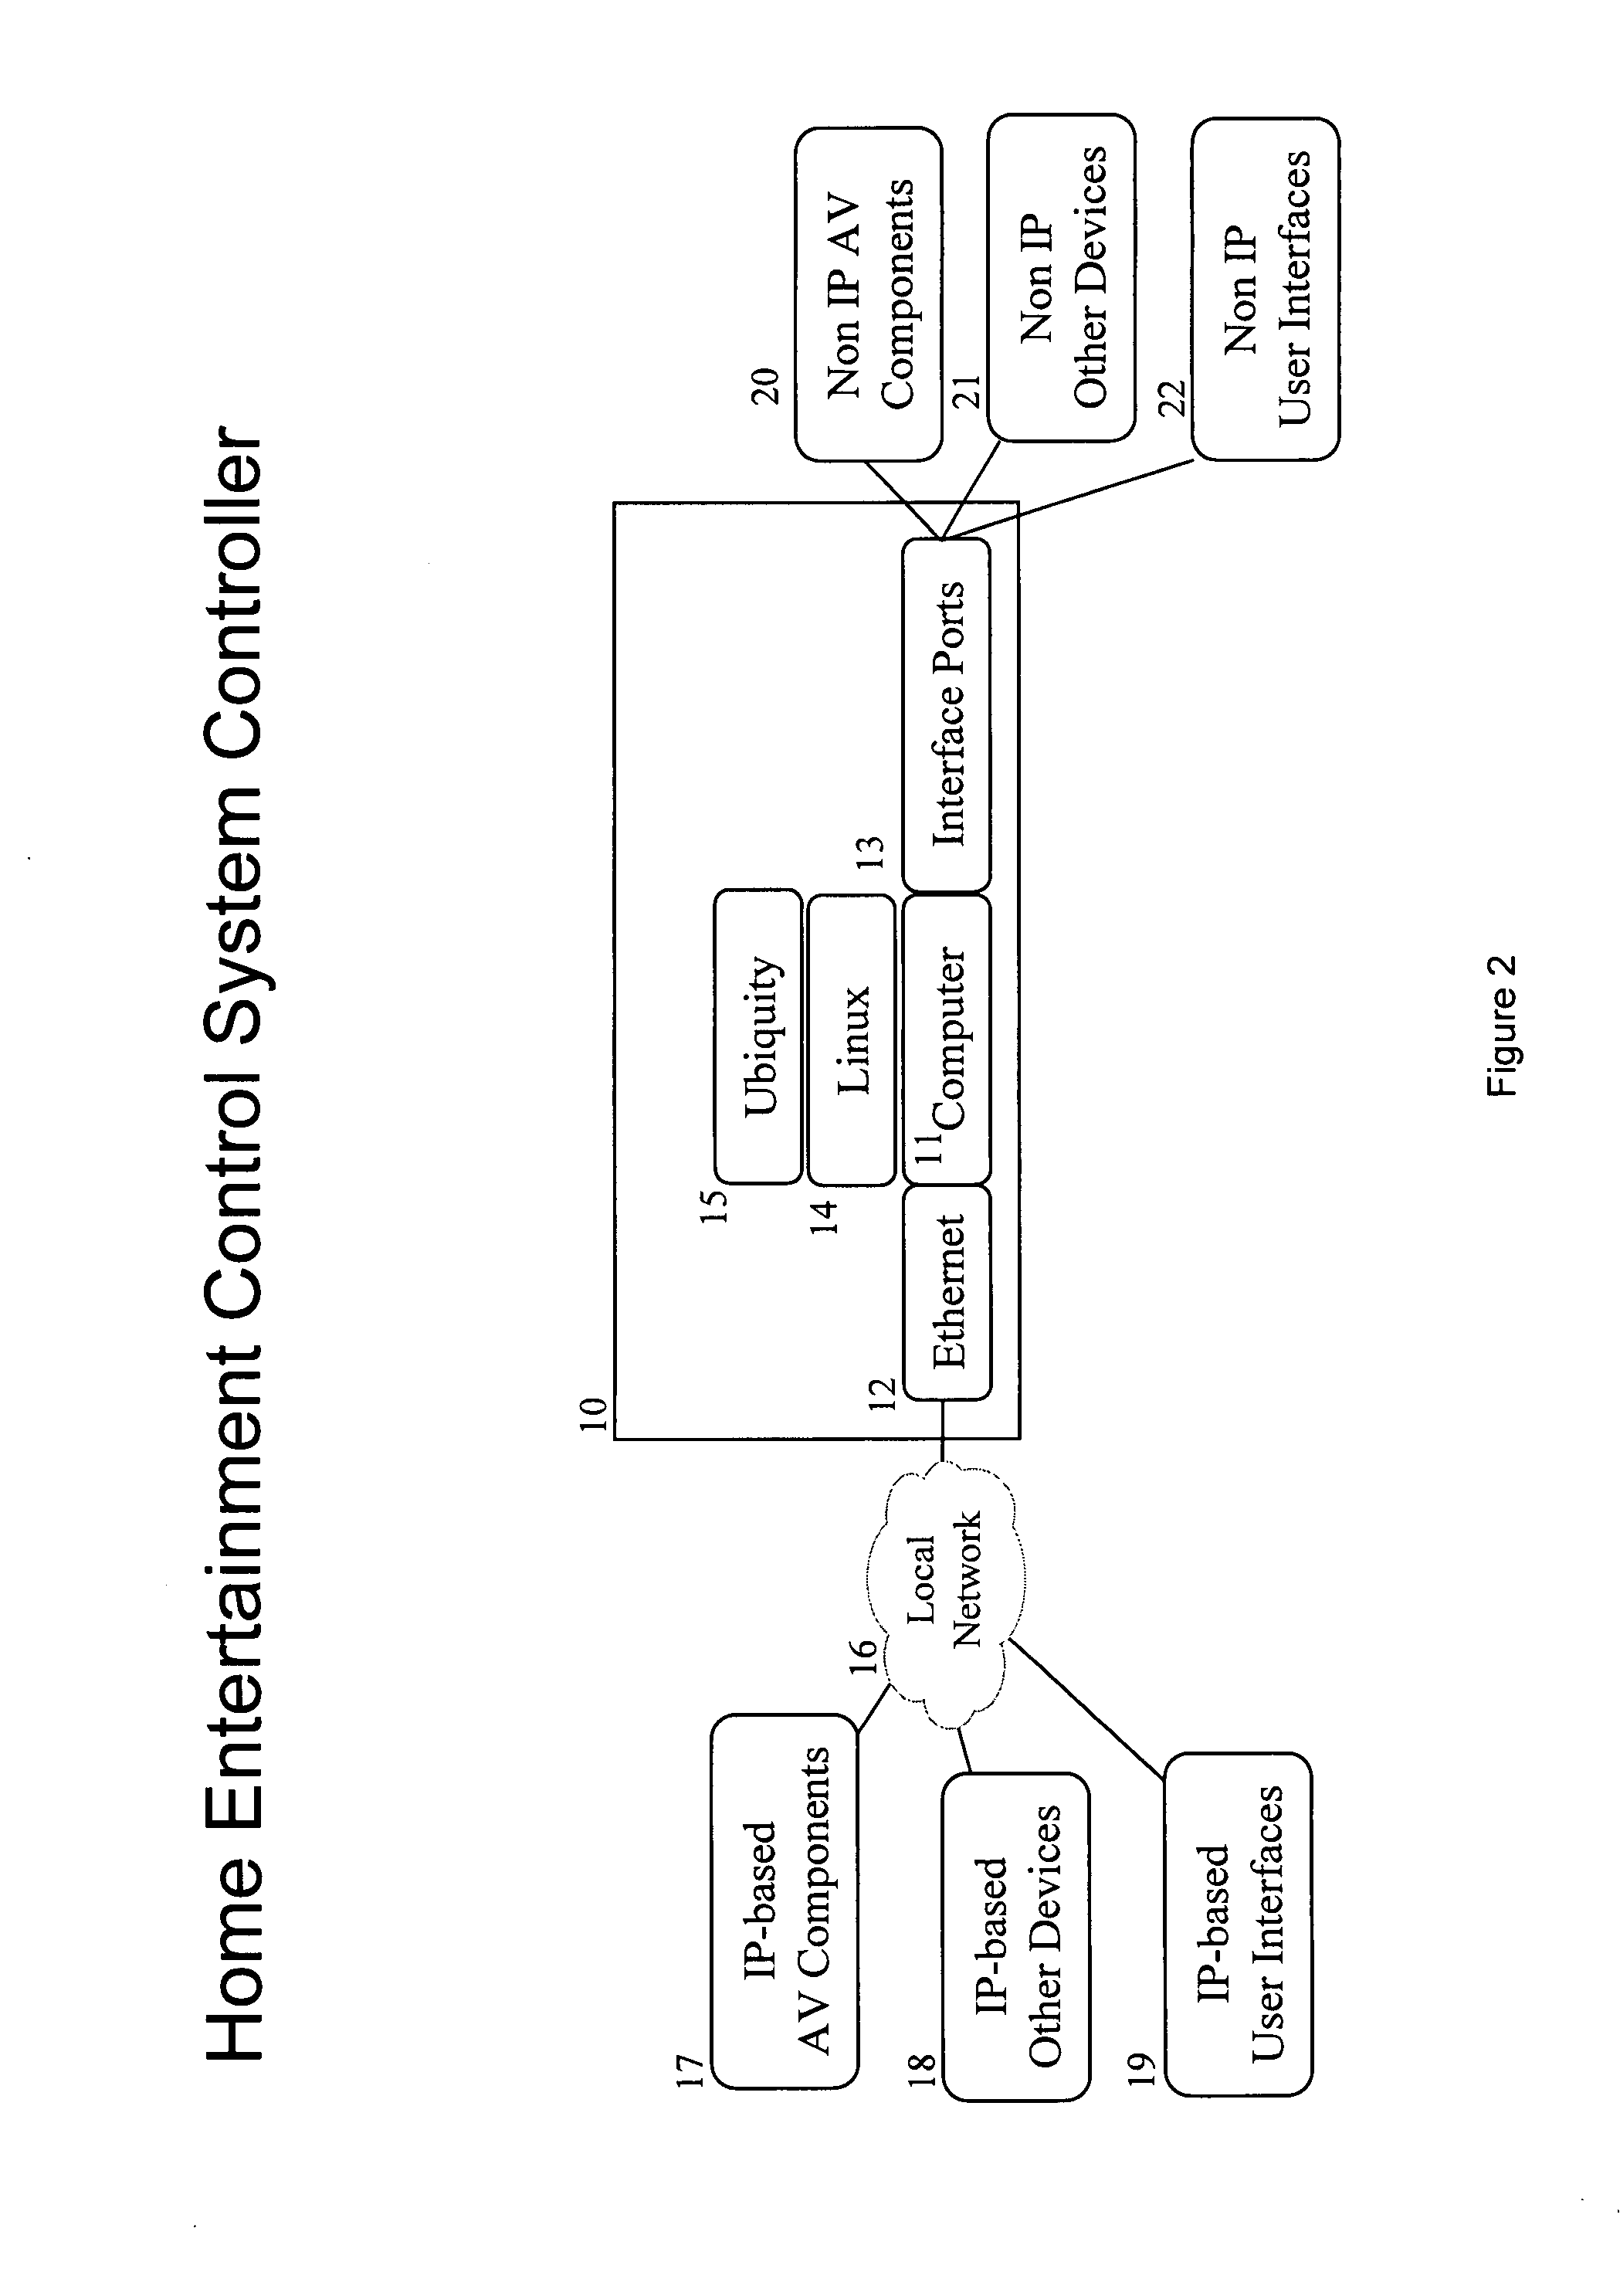 Home entertainment system and method